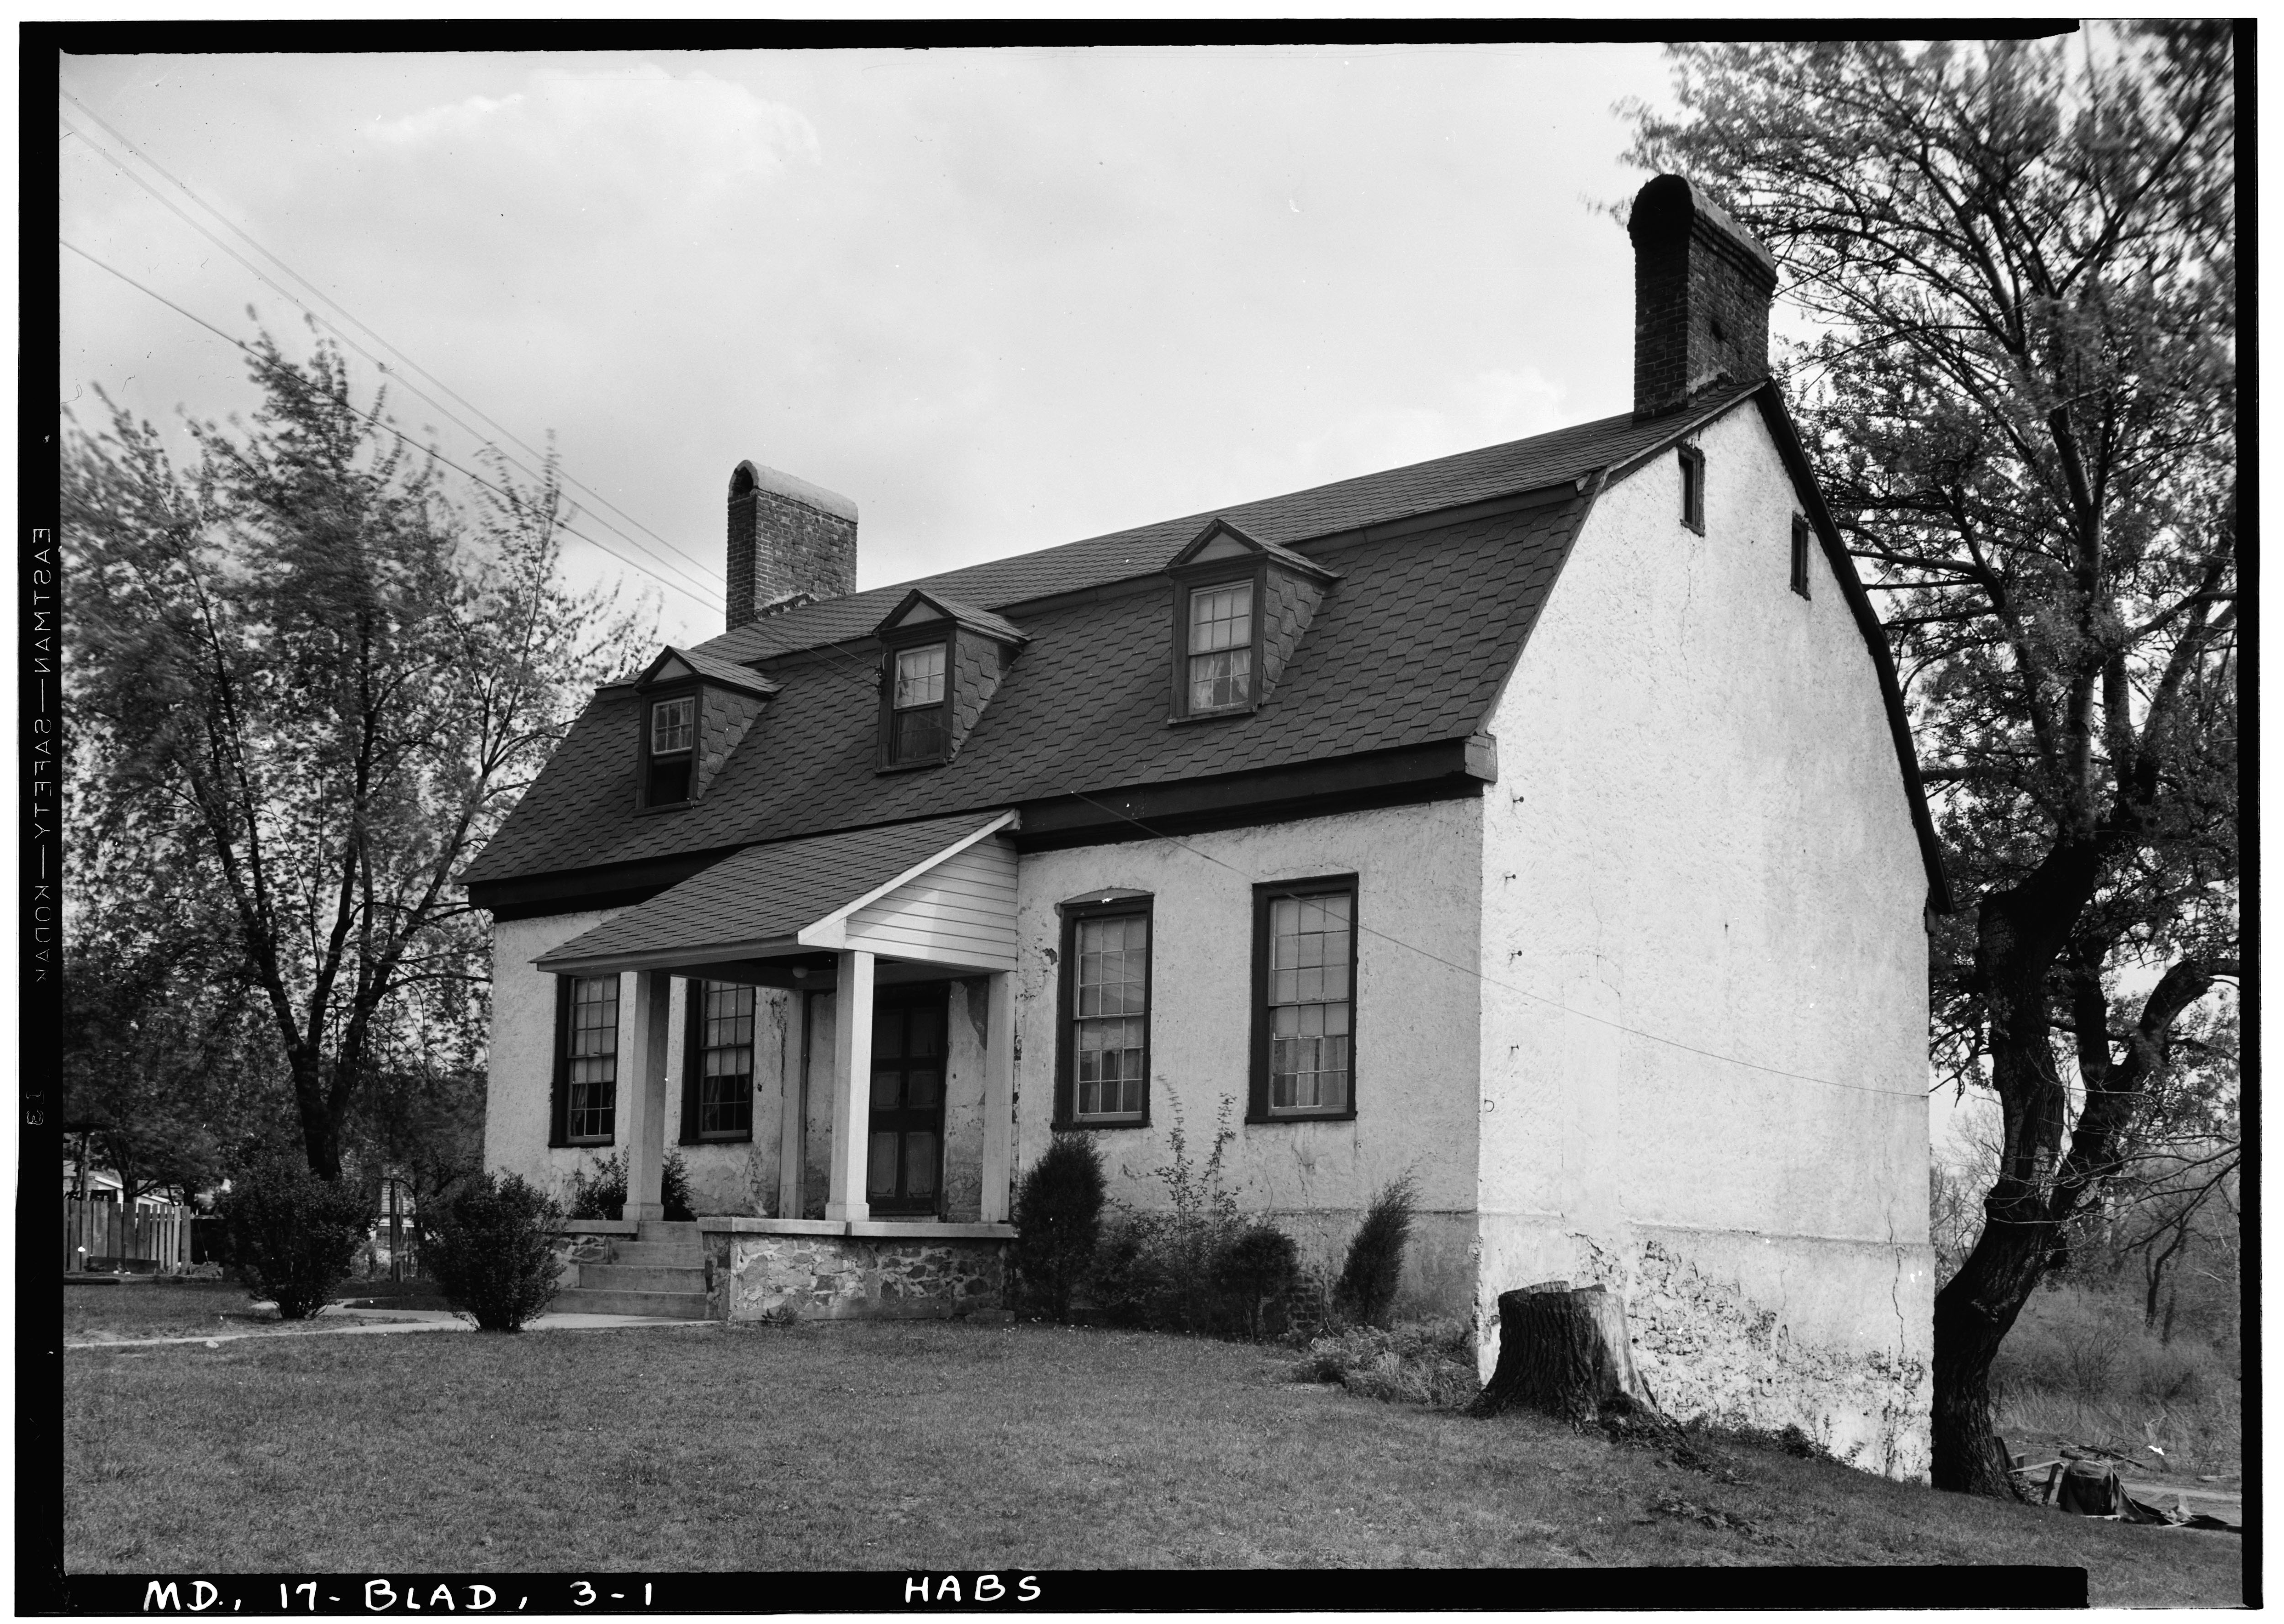 Halleary-Magruder House